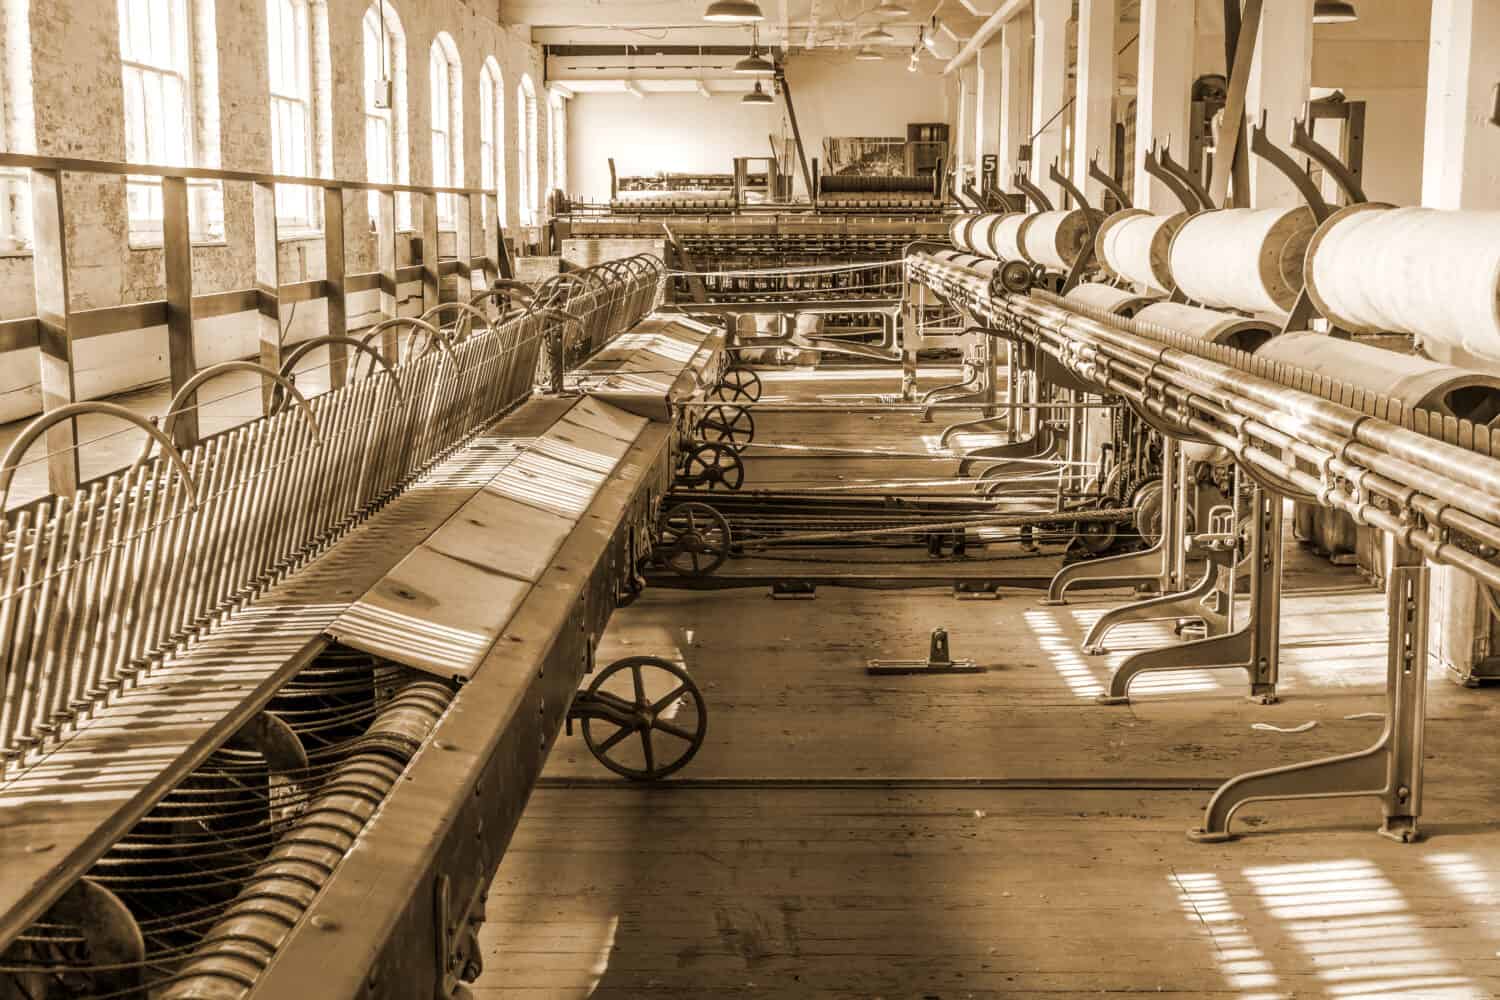 Old 1900s Woolen Mill Machinery and Manufacturing in Sepia Tone.